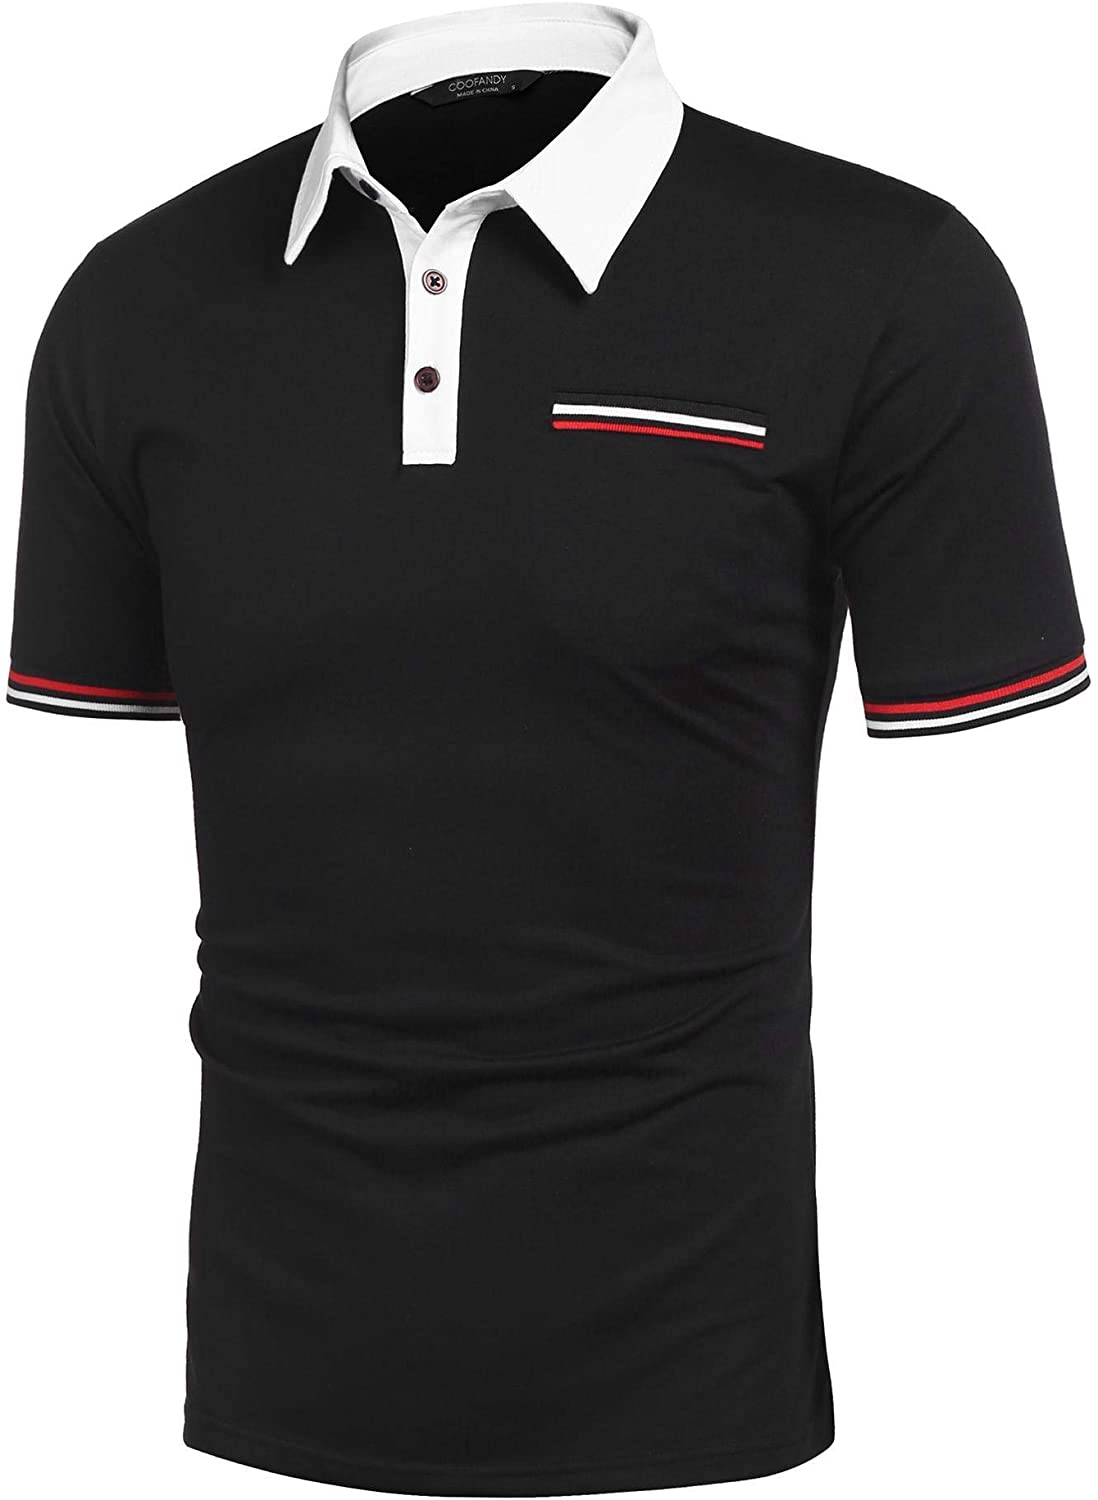 COOFANDY Mens Short Sleeve Polo Shirt Casual Striped Collar Classic Fit Cotton T Shirts